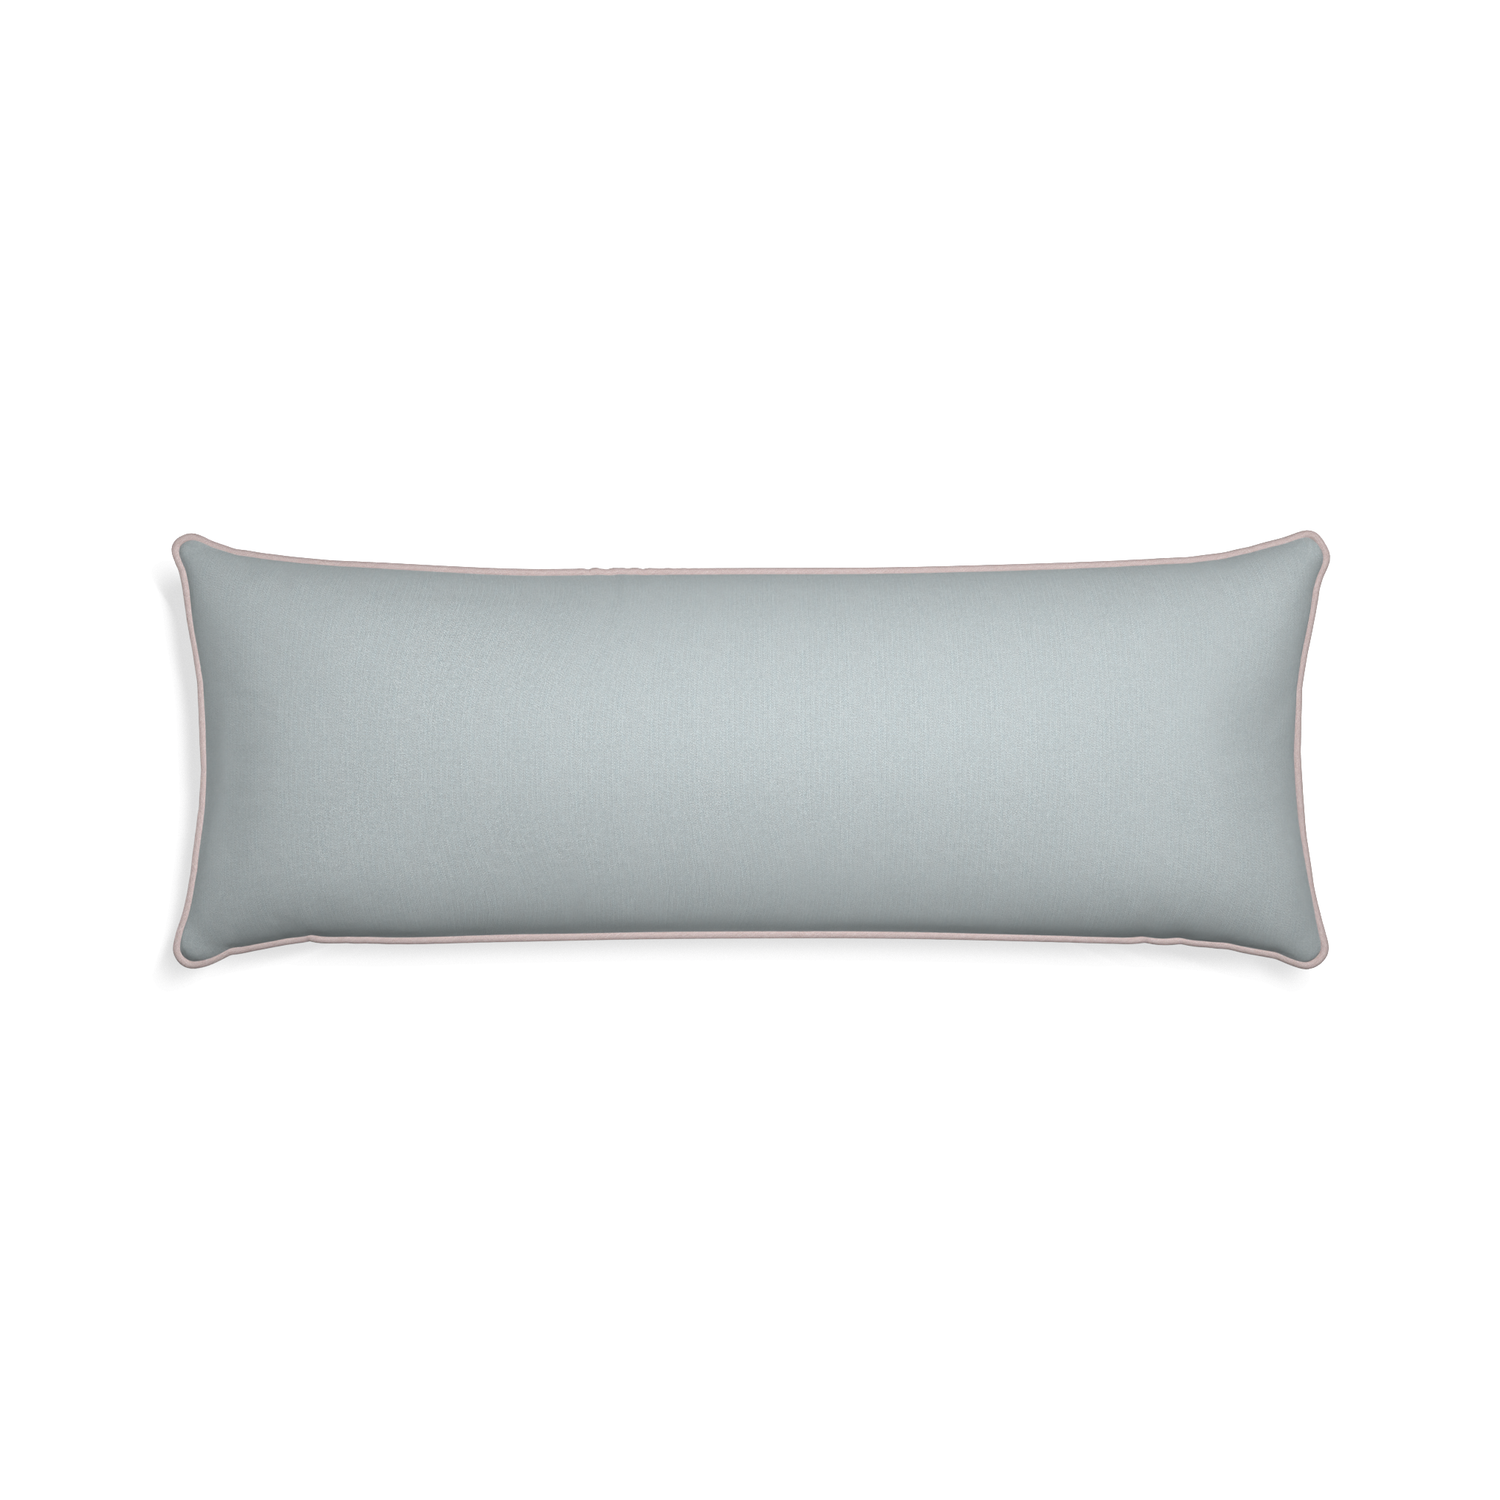 Xl-lumbar sea custom grey bluepillow with orchid piping on white background